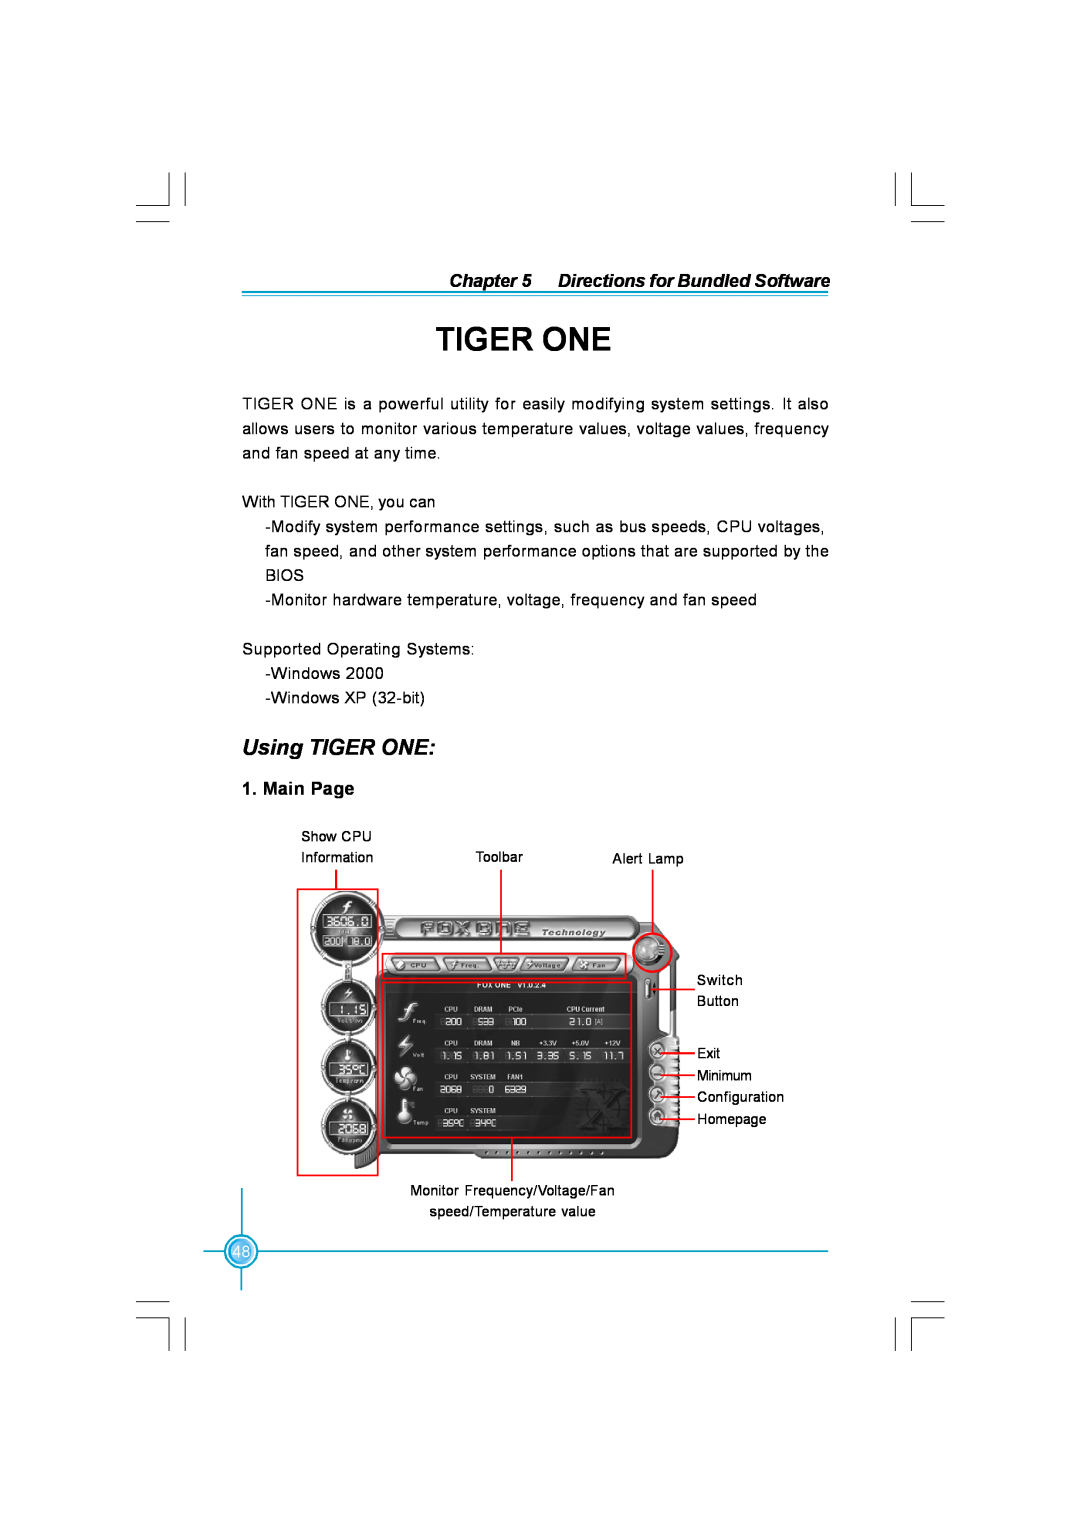 Foxconn N570SM2AA user manual Tiger One, Using TIGER ONE, Directions for Bundled Software, Main Page 